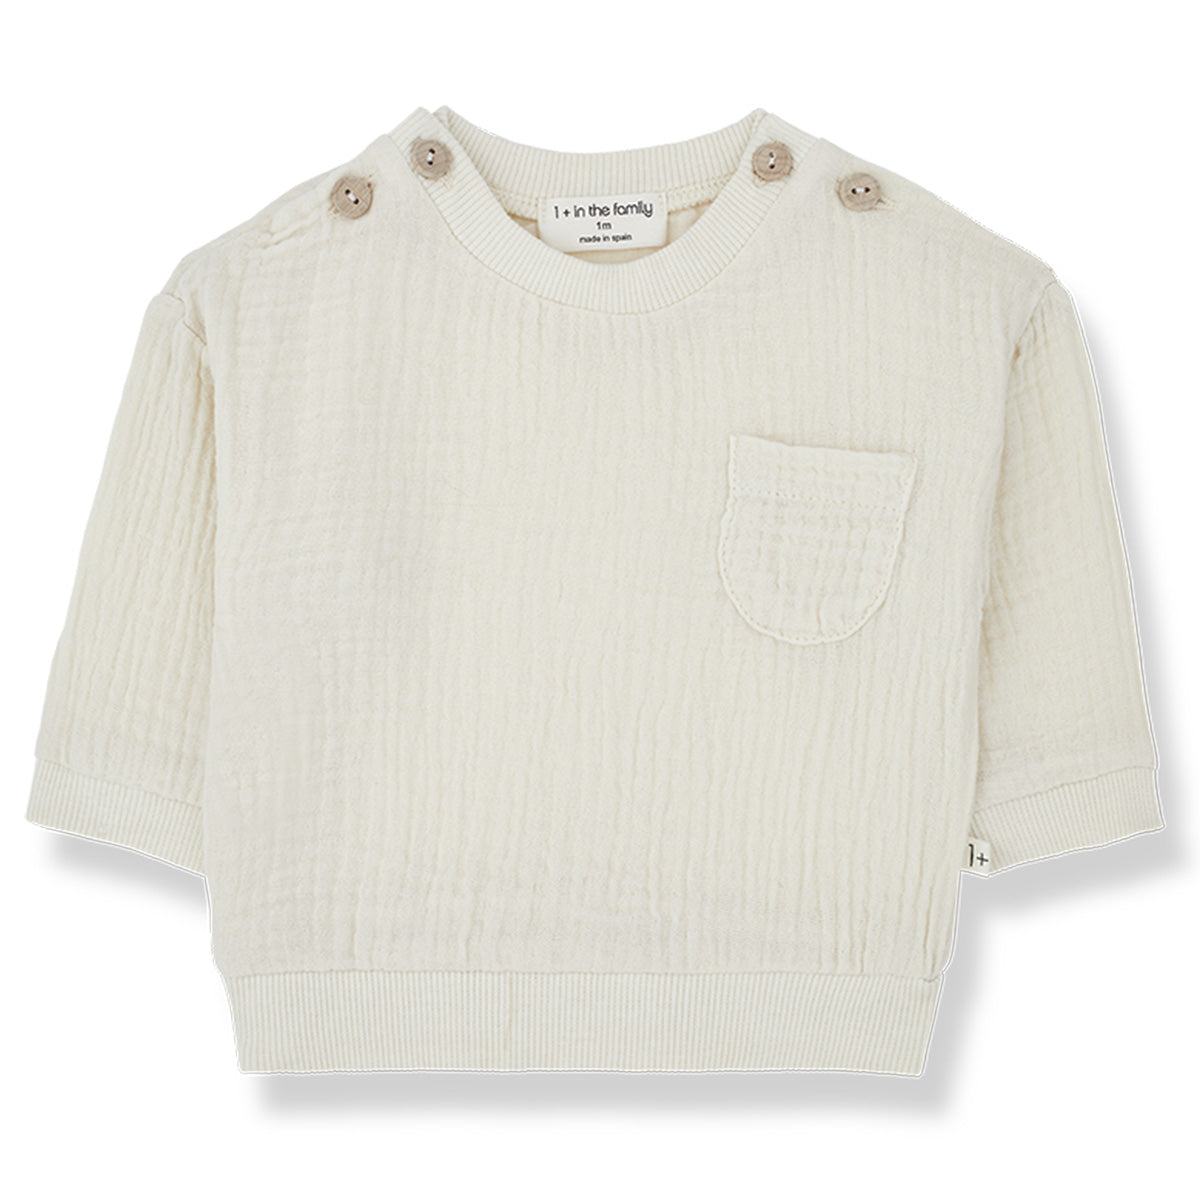 The Lorenzo Sweater from 1 + in the Family. Muslin fabric, Crew neck, Long sleeves, Button on the shoulders